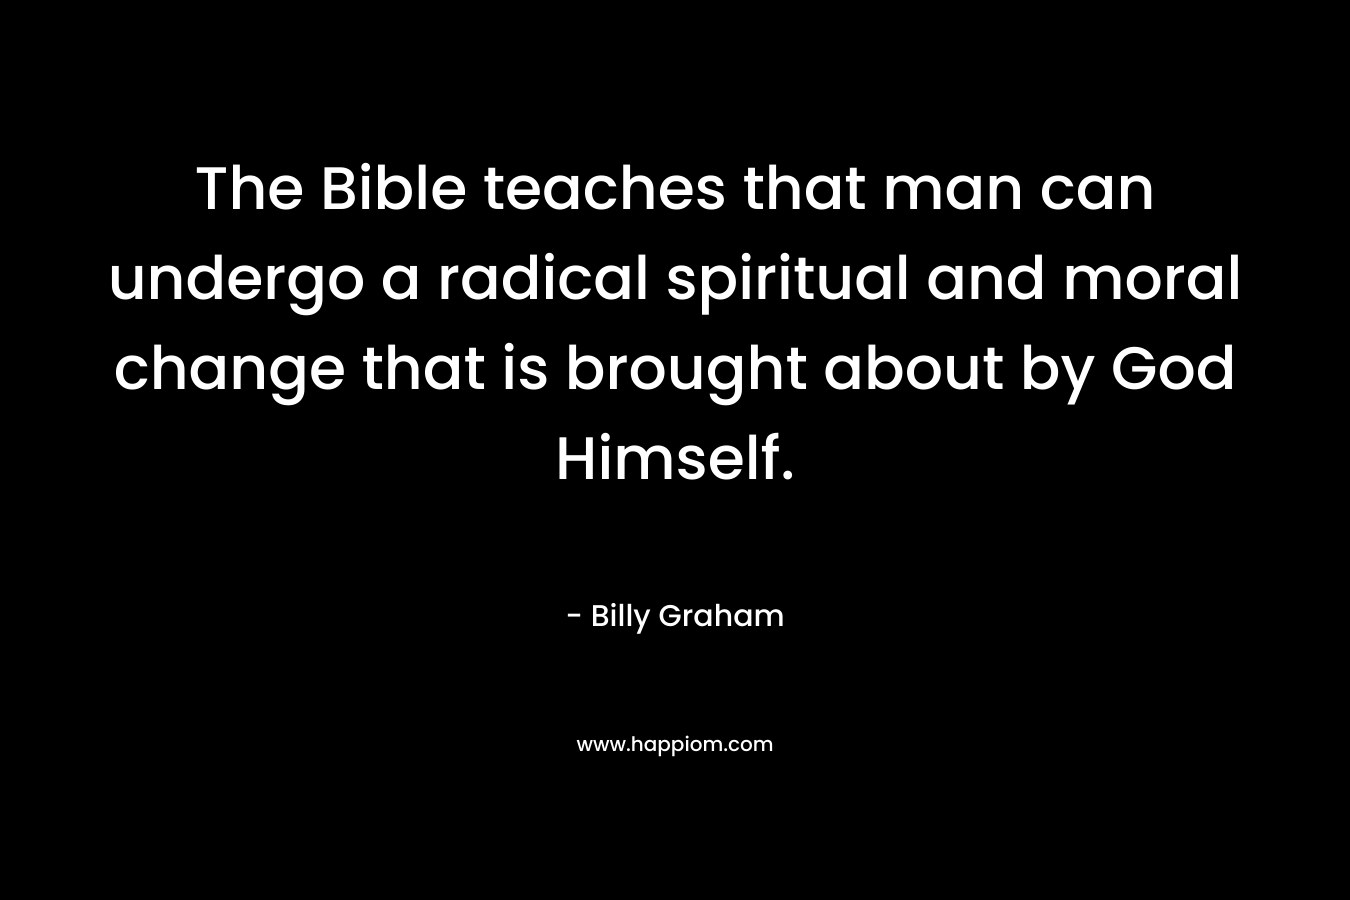 The Bible teaches that man can undergo a radical spiritual and moral change that is brought about by God Himself.